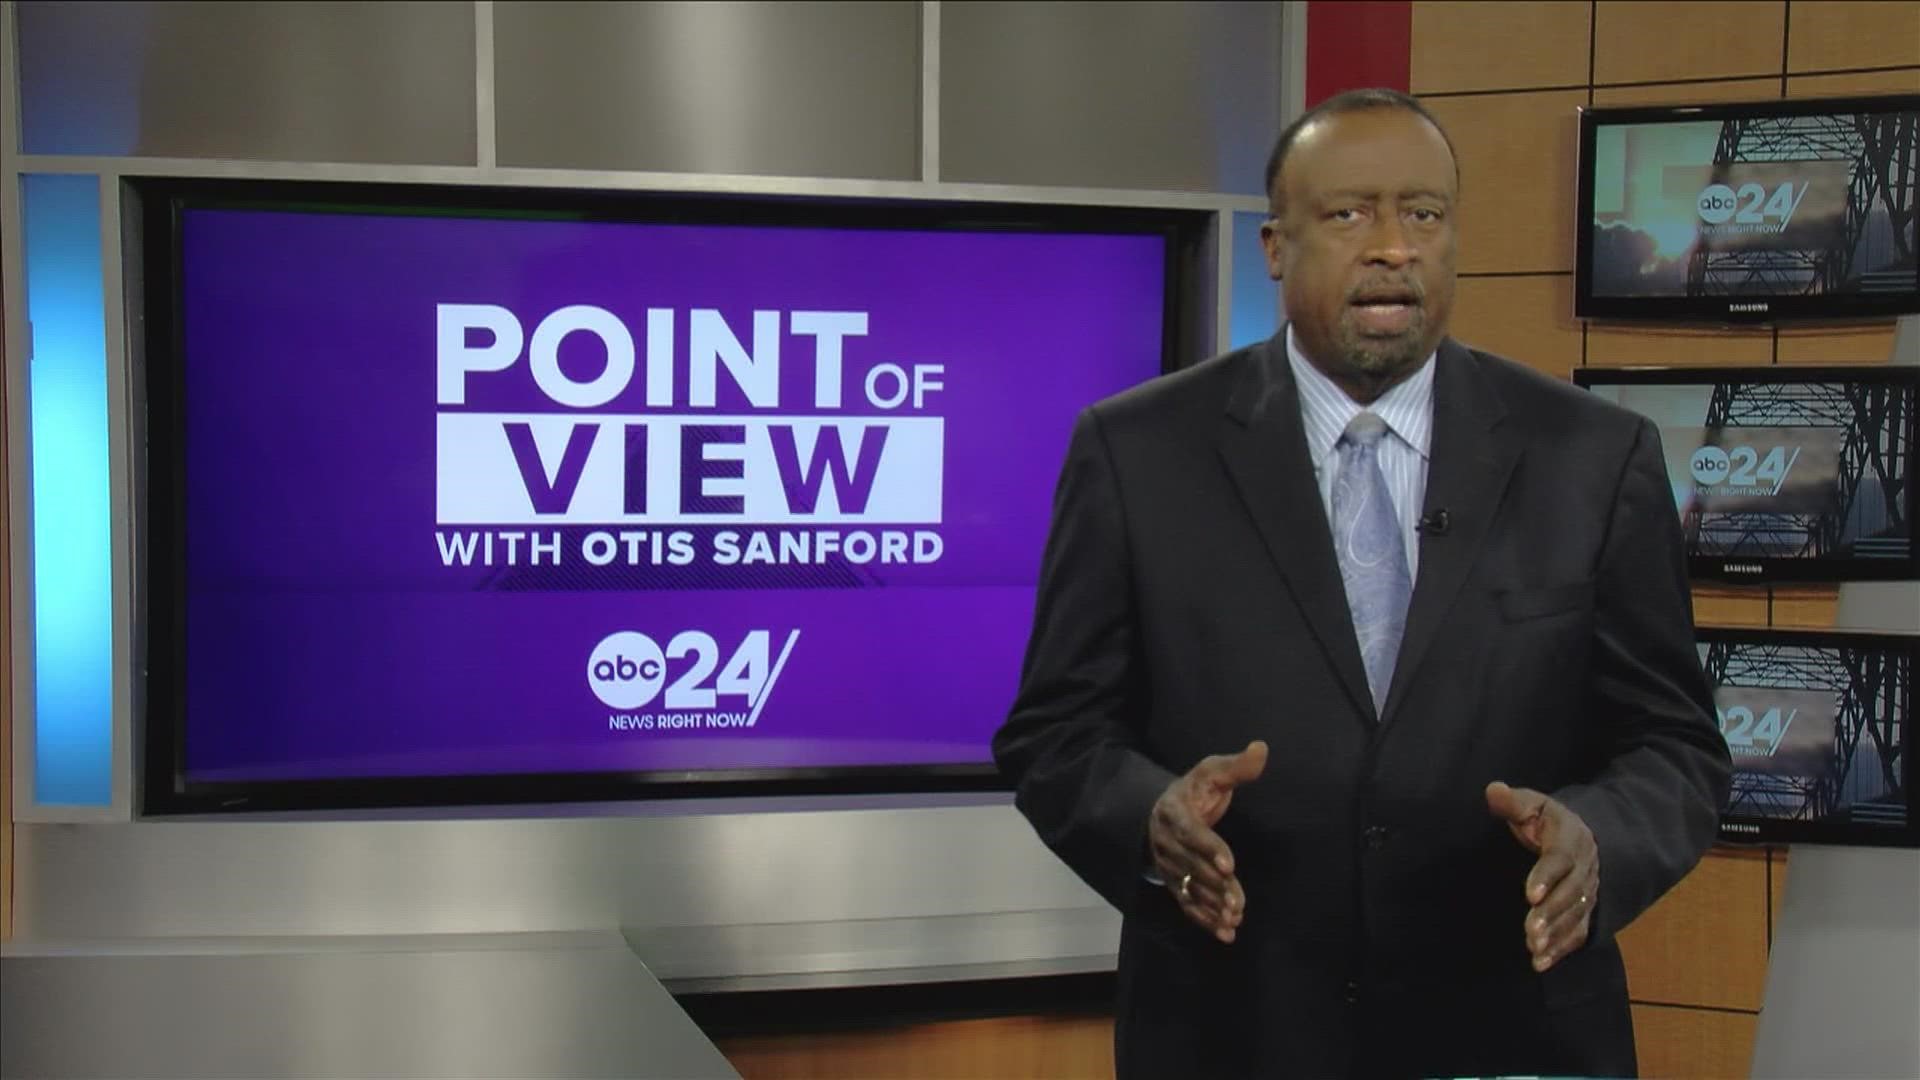 ABC 24 political analyst and commentator Otis Sanford shared his point of view on MLGW board members serving expired terms.